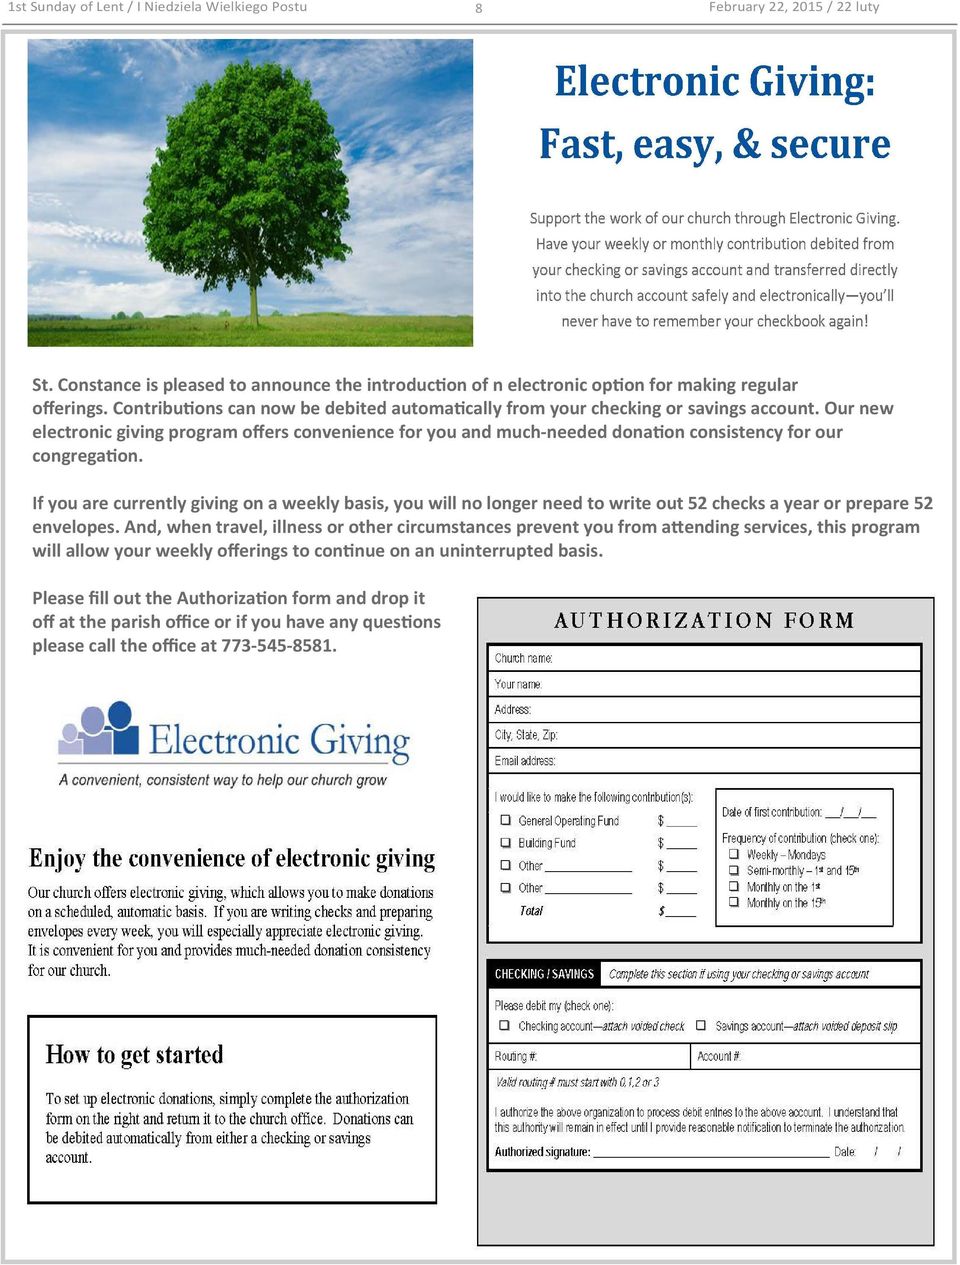 Our new electronic giving program offers convenience for you and much-needed dona on consistency for our congrega on.